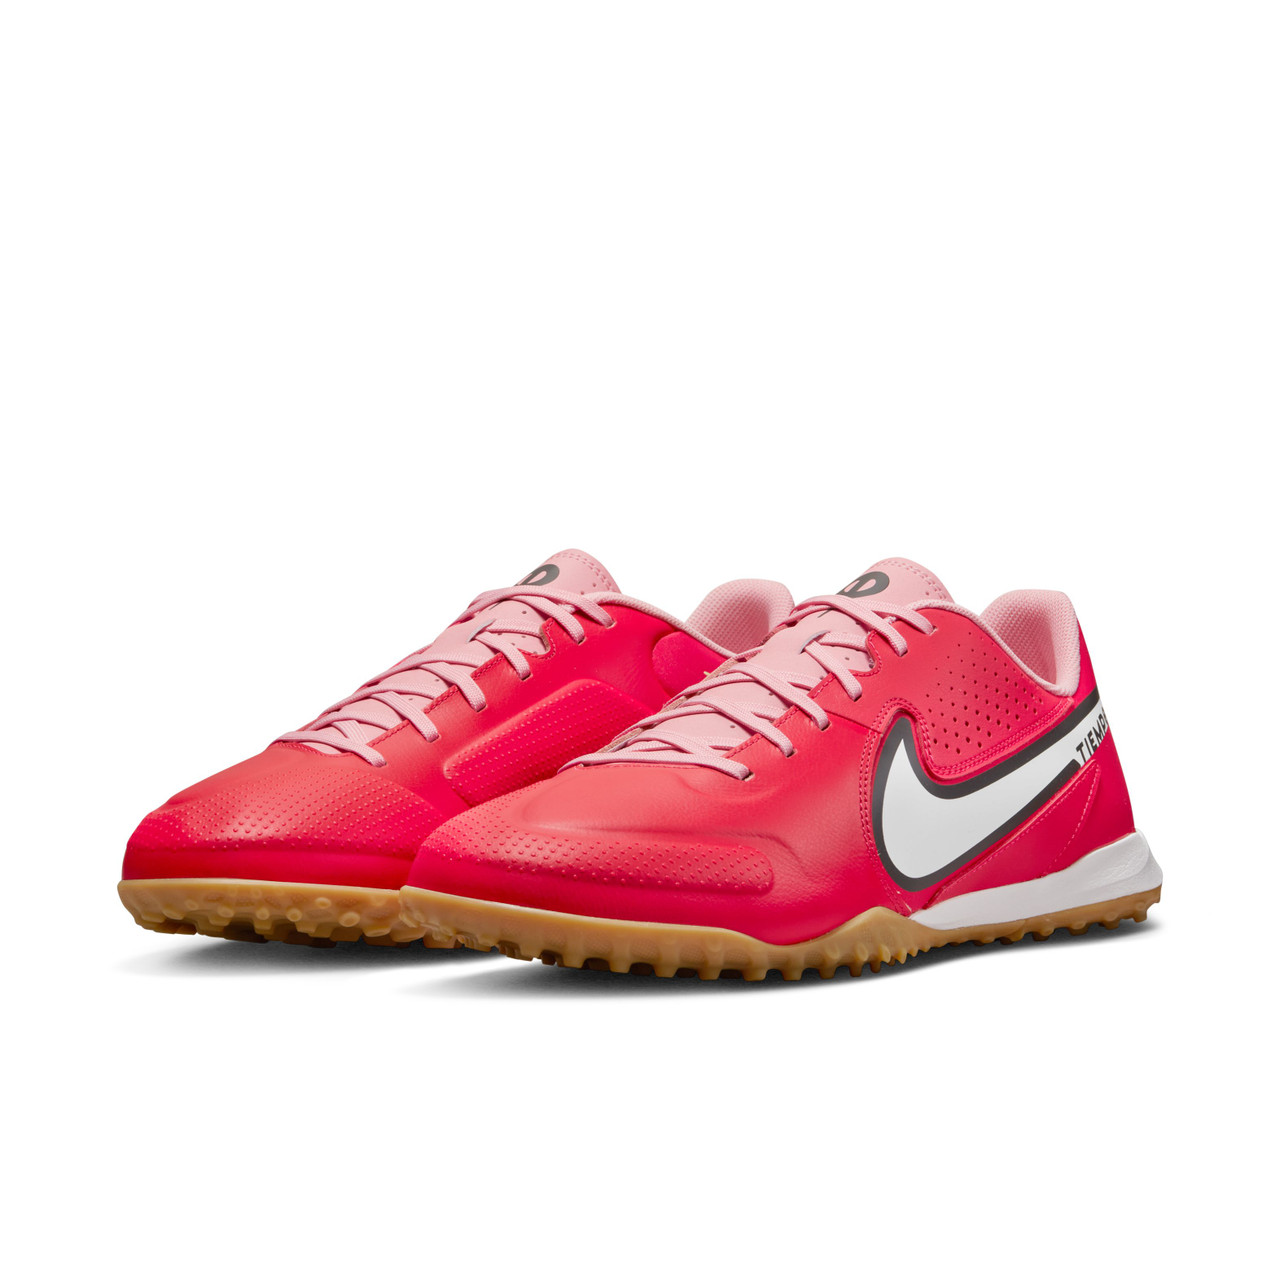 Nike Tiempo Legend 9 Academy Turf Soccer Shoe 618-Red-White - Chicago Soccer